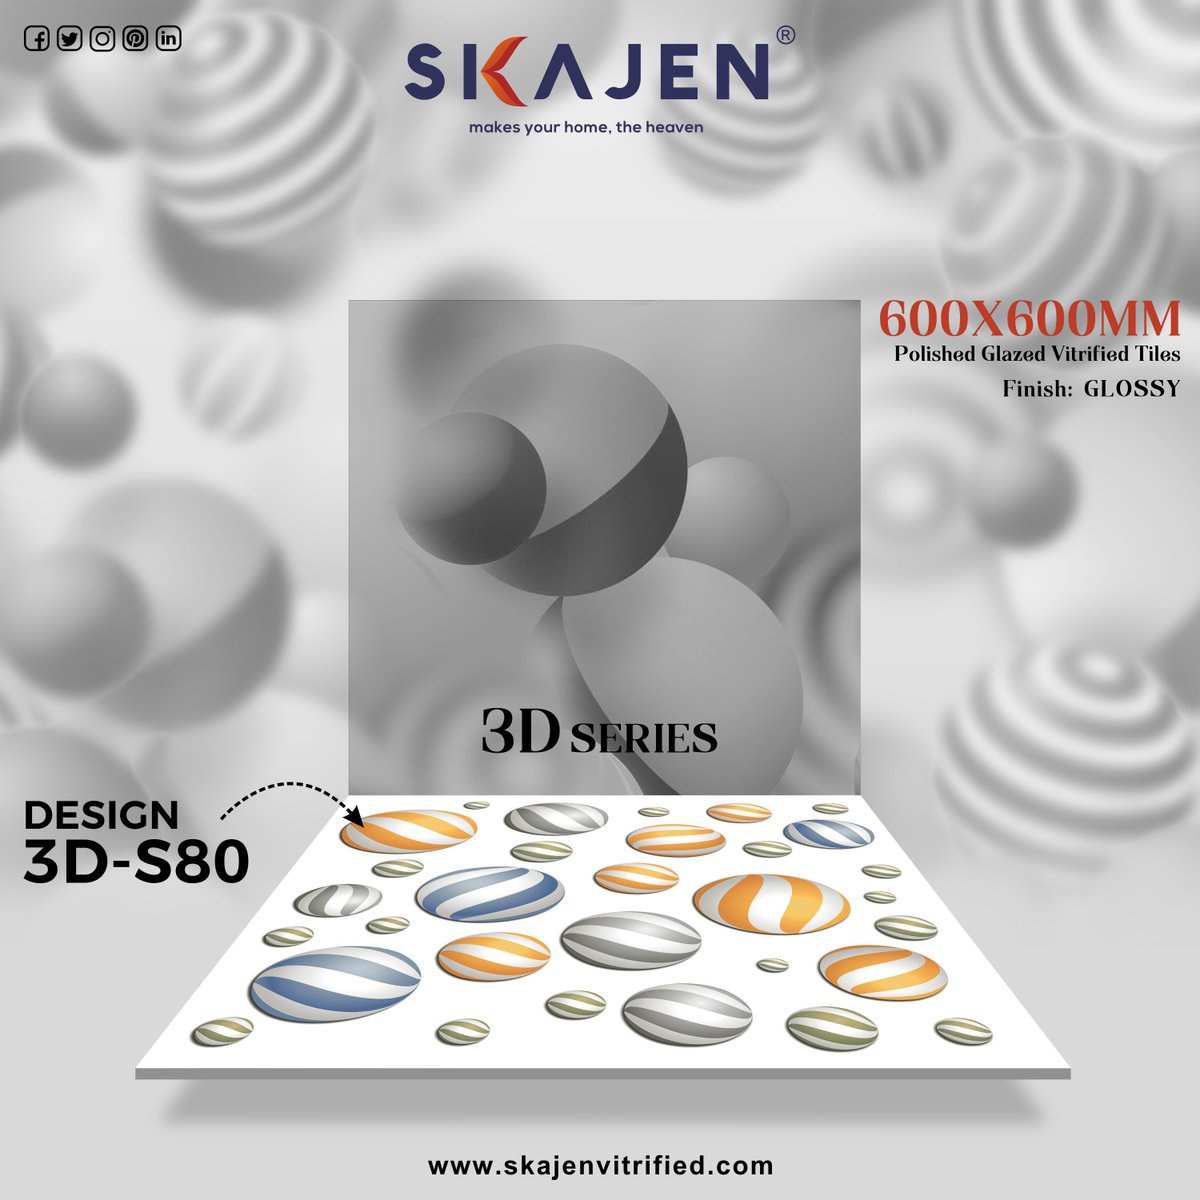 Experience the impact of effortless design in your spaces with an exclusive collection of our 3D design tiles.

#3dtiles #3dseries #3dDesign #glossytiles #glazedtiles #skajen #glazed #vitrified #design #architecture #tile #interior #homedecor #flooring #floor #tiledesign #ceramic